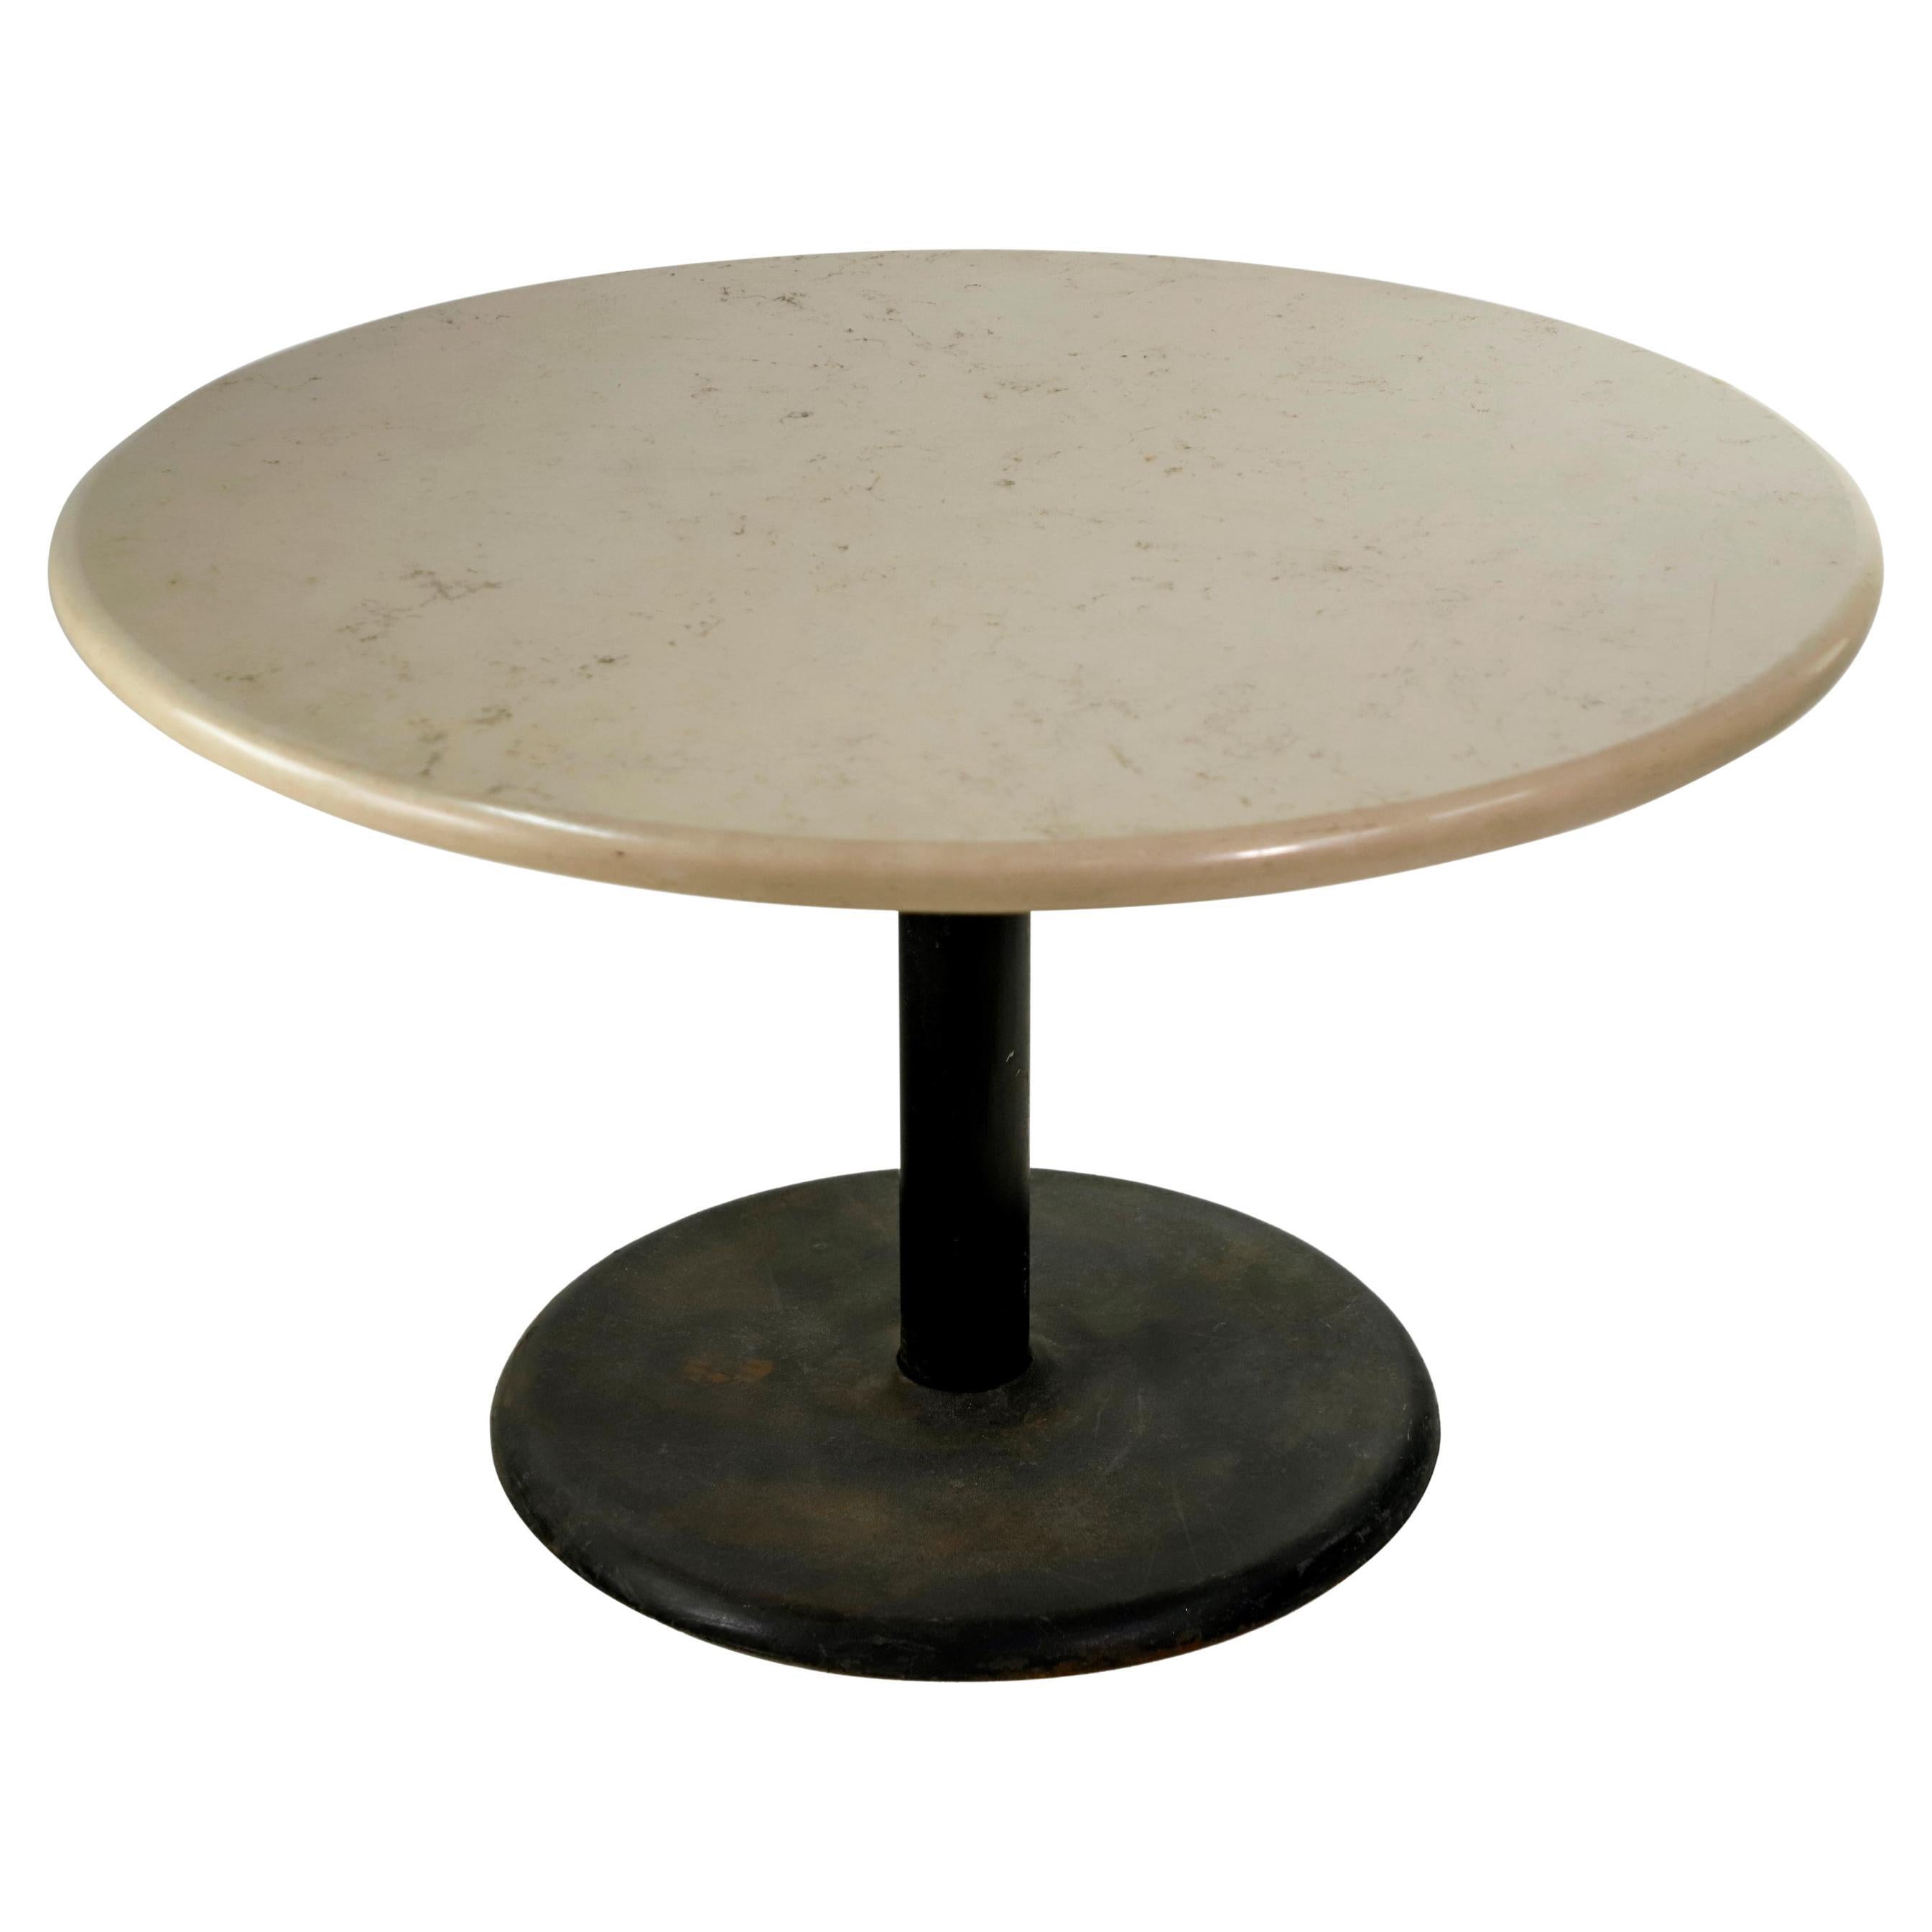 Round Empire State Building Marble Table Top Cast Iron Base For Sale